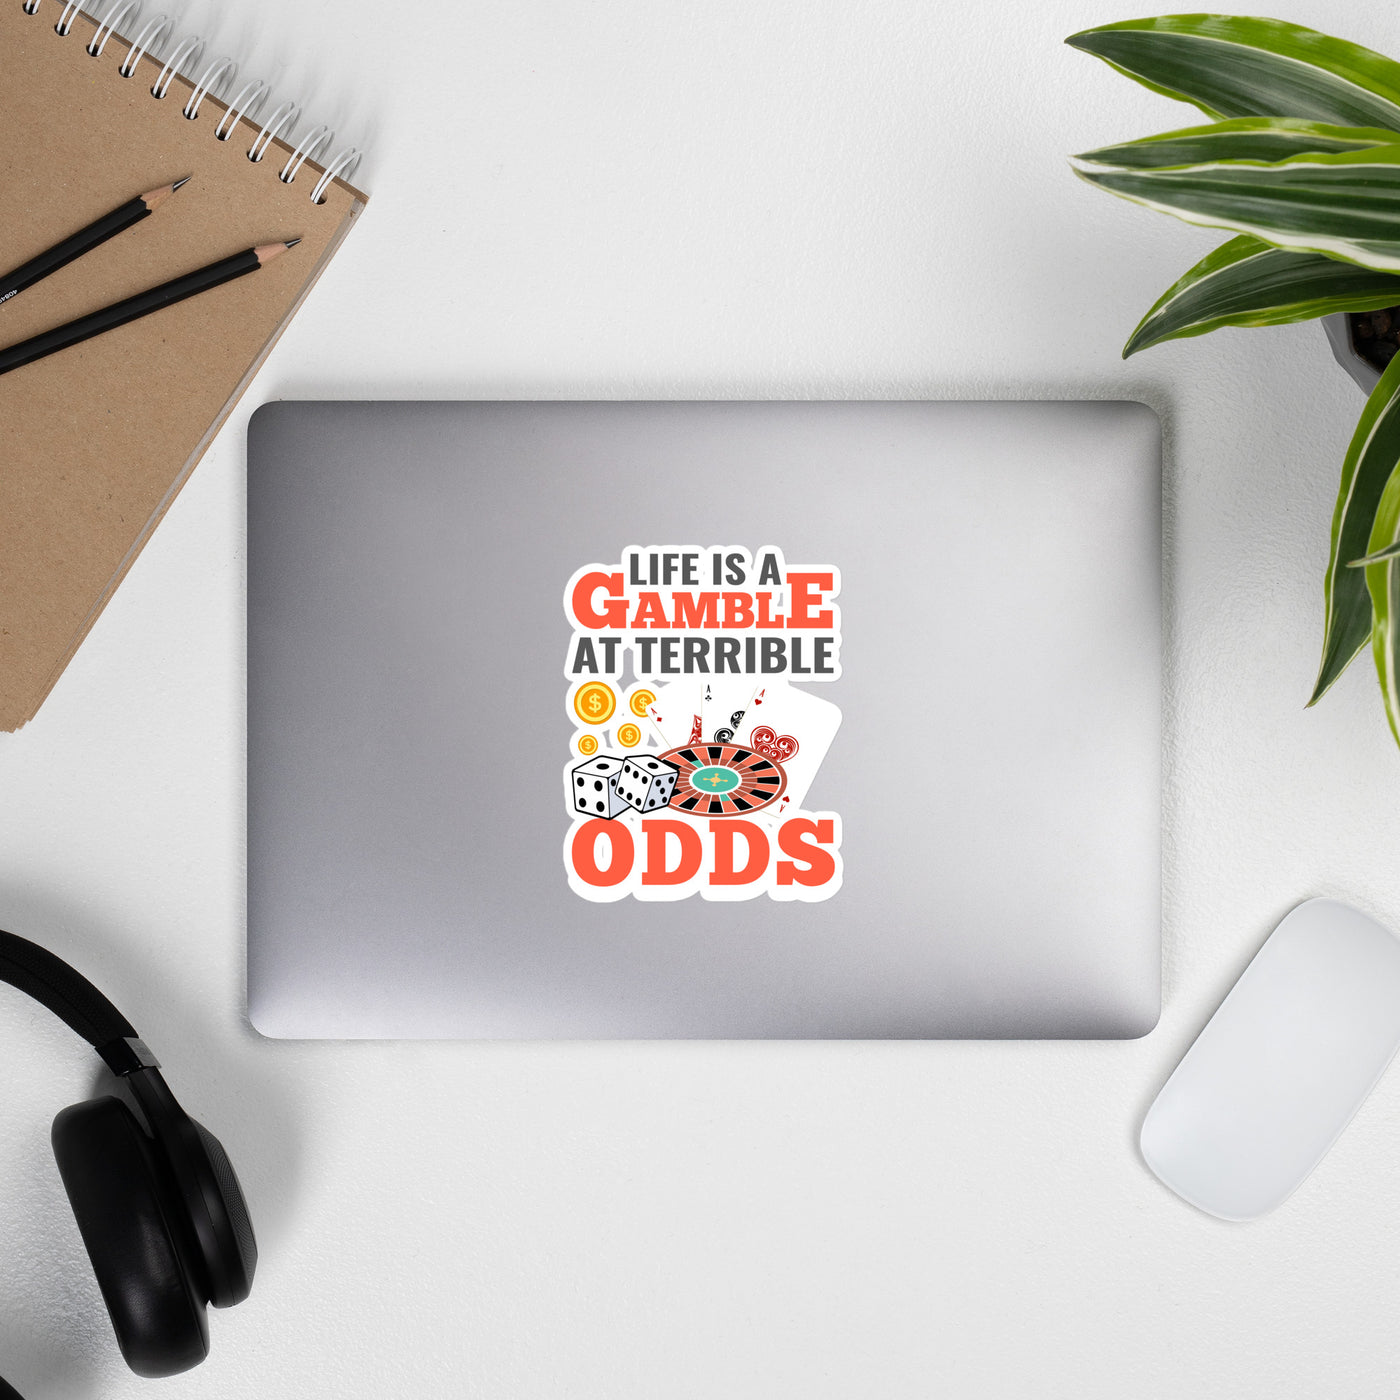 Life is a Gamble at terrible Odds - Bubble-free stickers